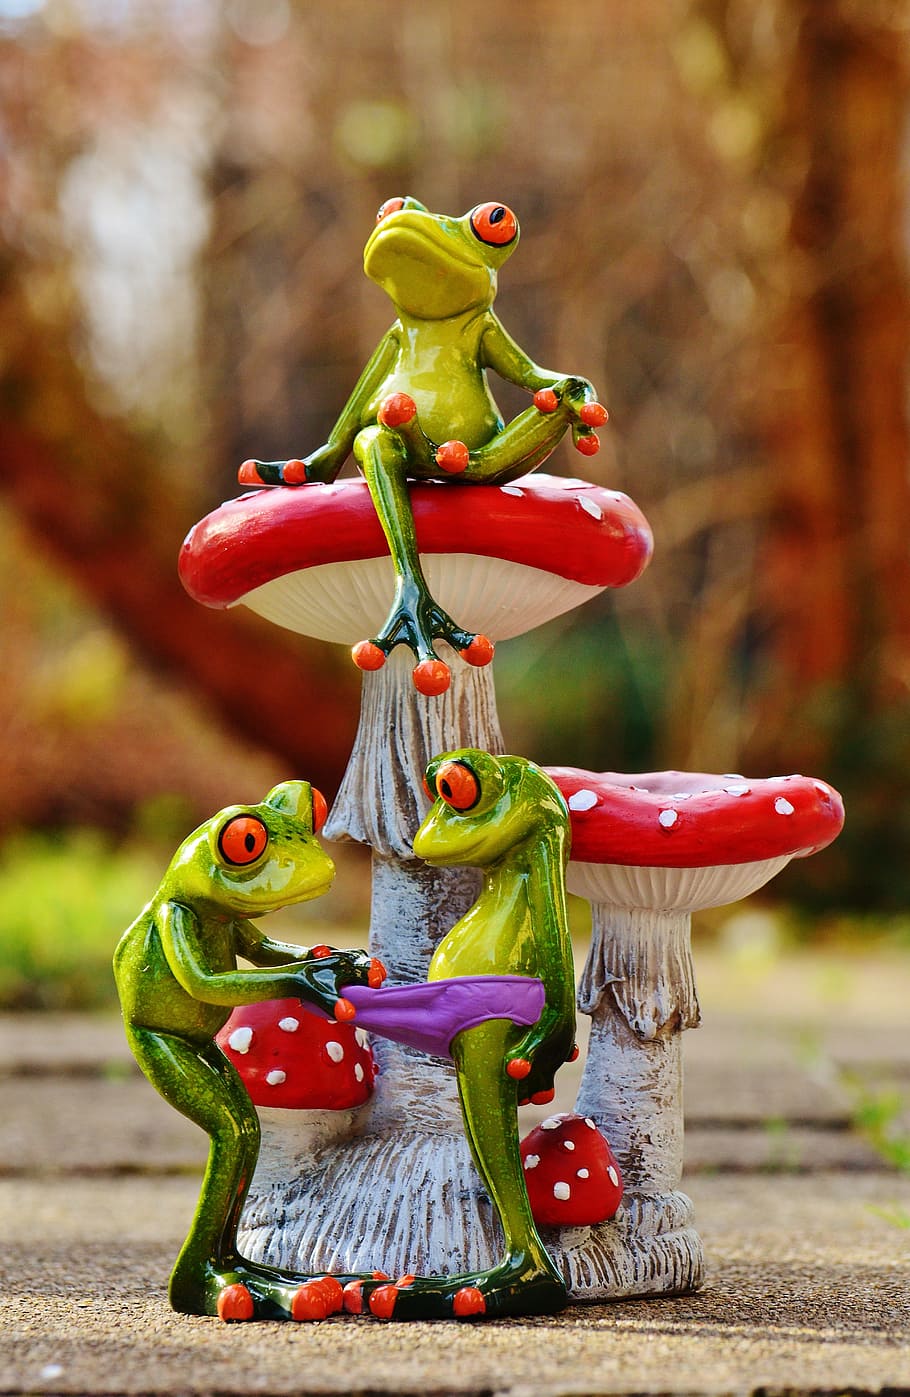 frogs, mushrooms, figures, group, funny, cute, animals, sweet, fly agaric, curious